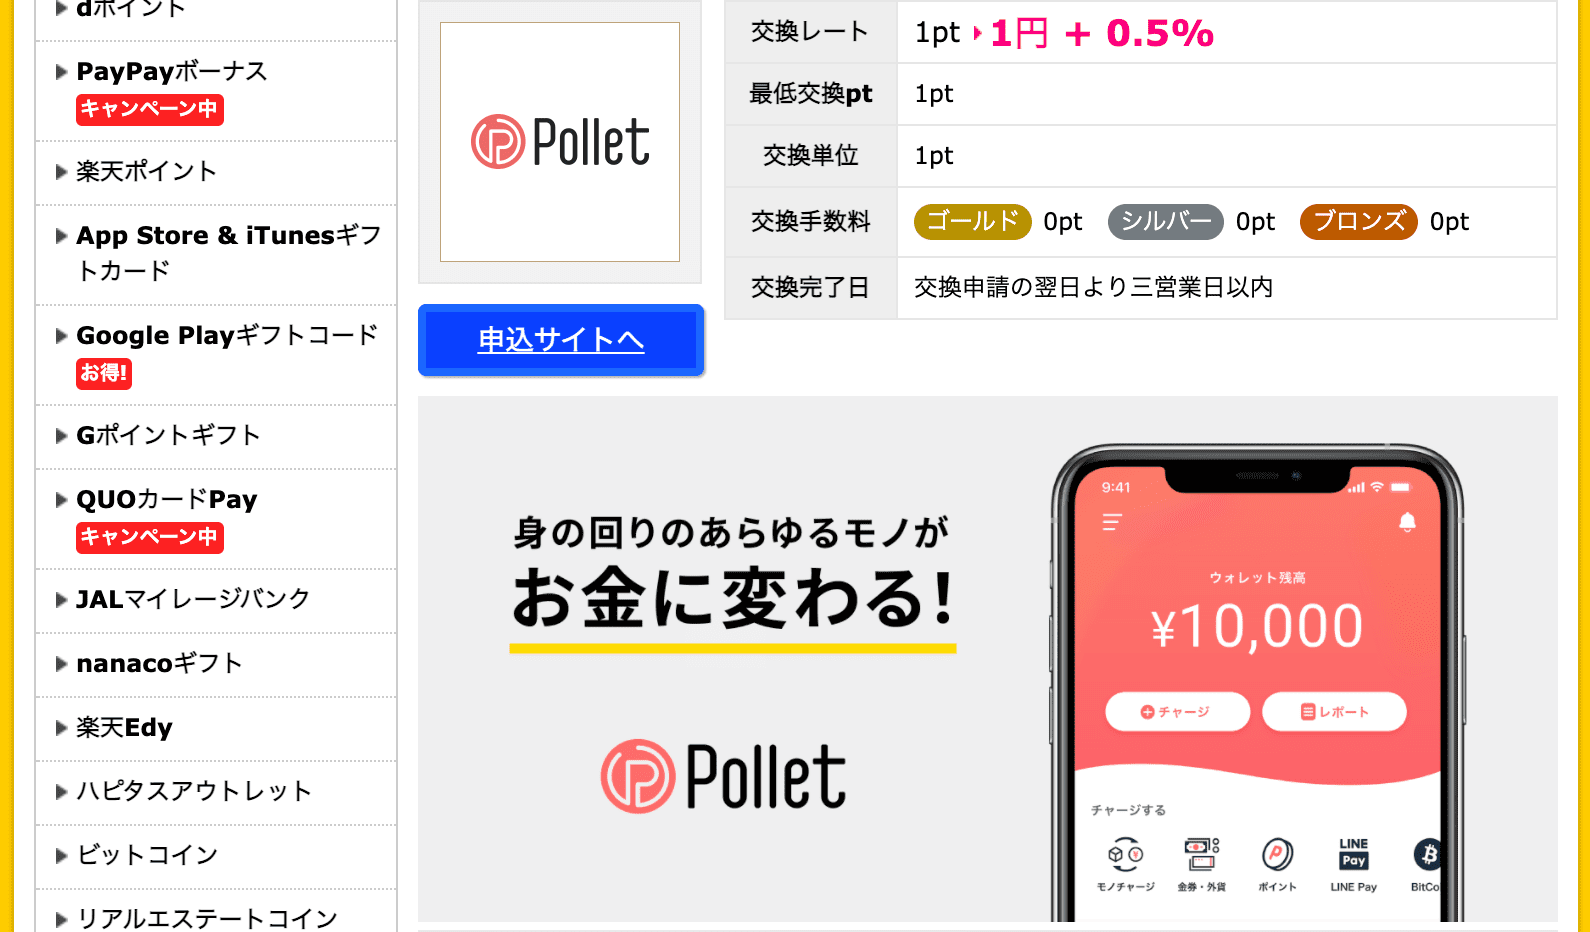 Pollet（ポレット）